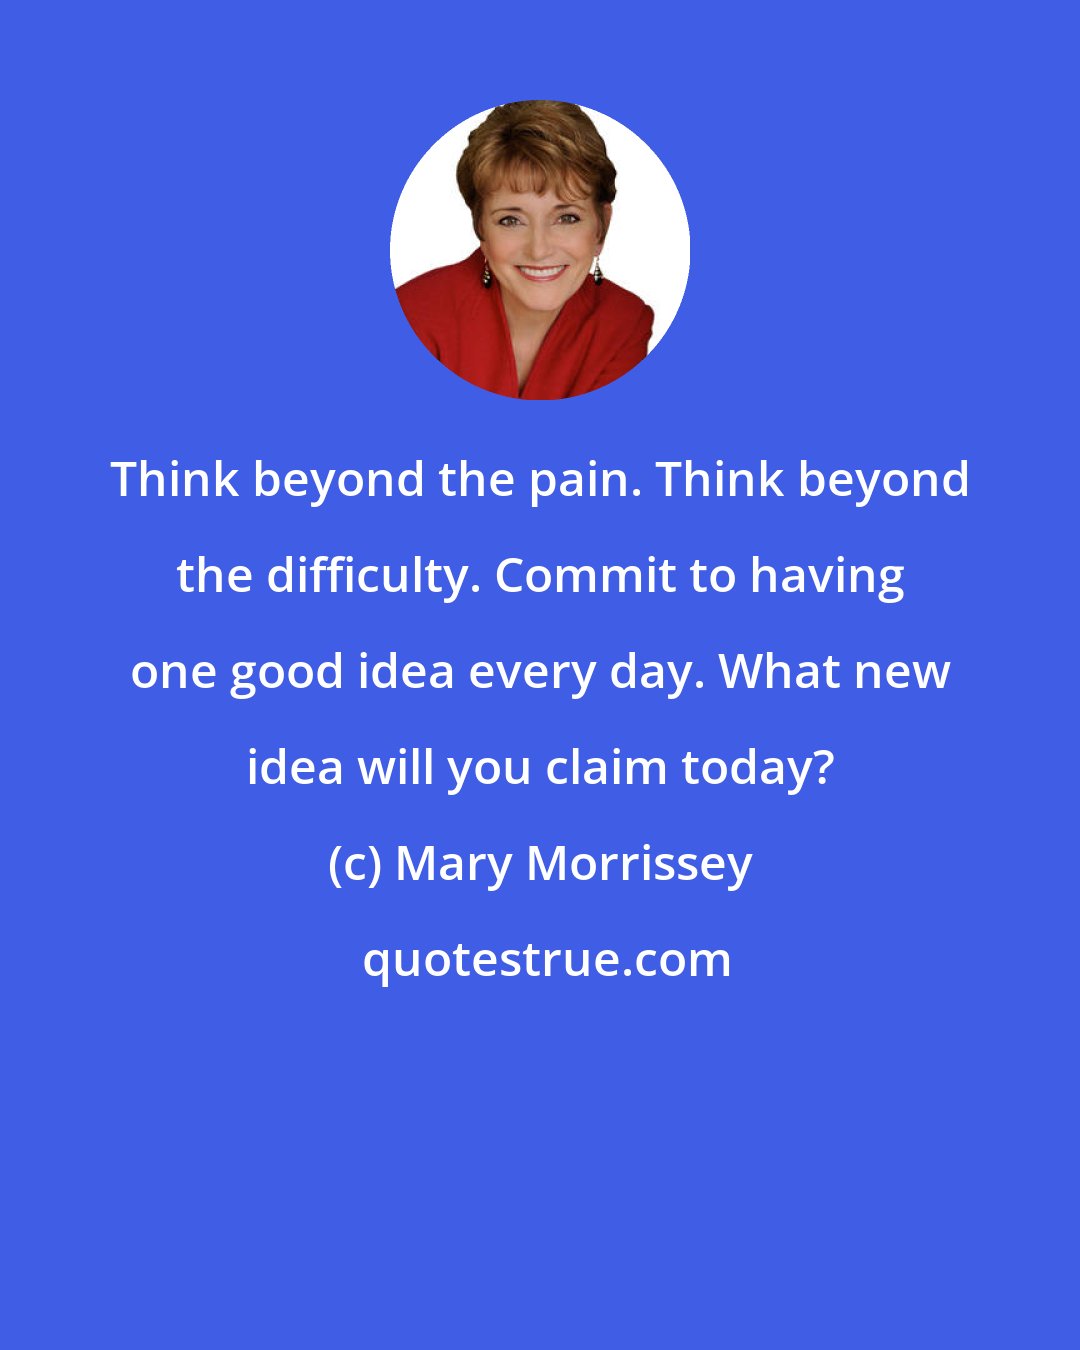 Mary Morrissey: Think beyond the pain. Think beyond the difficulty. Commit to having one good idea every day. What new idea will you claim today?